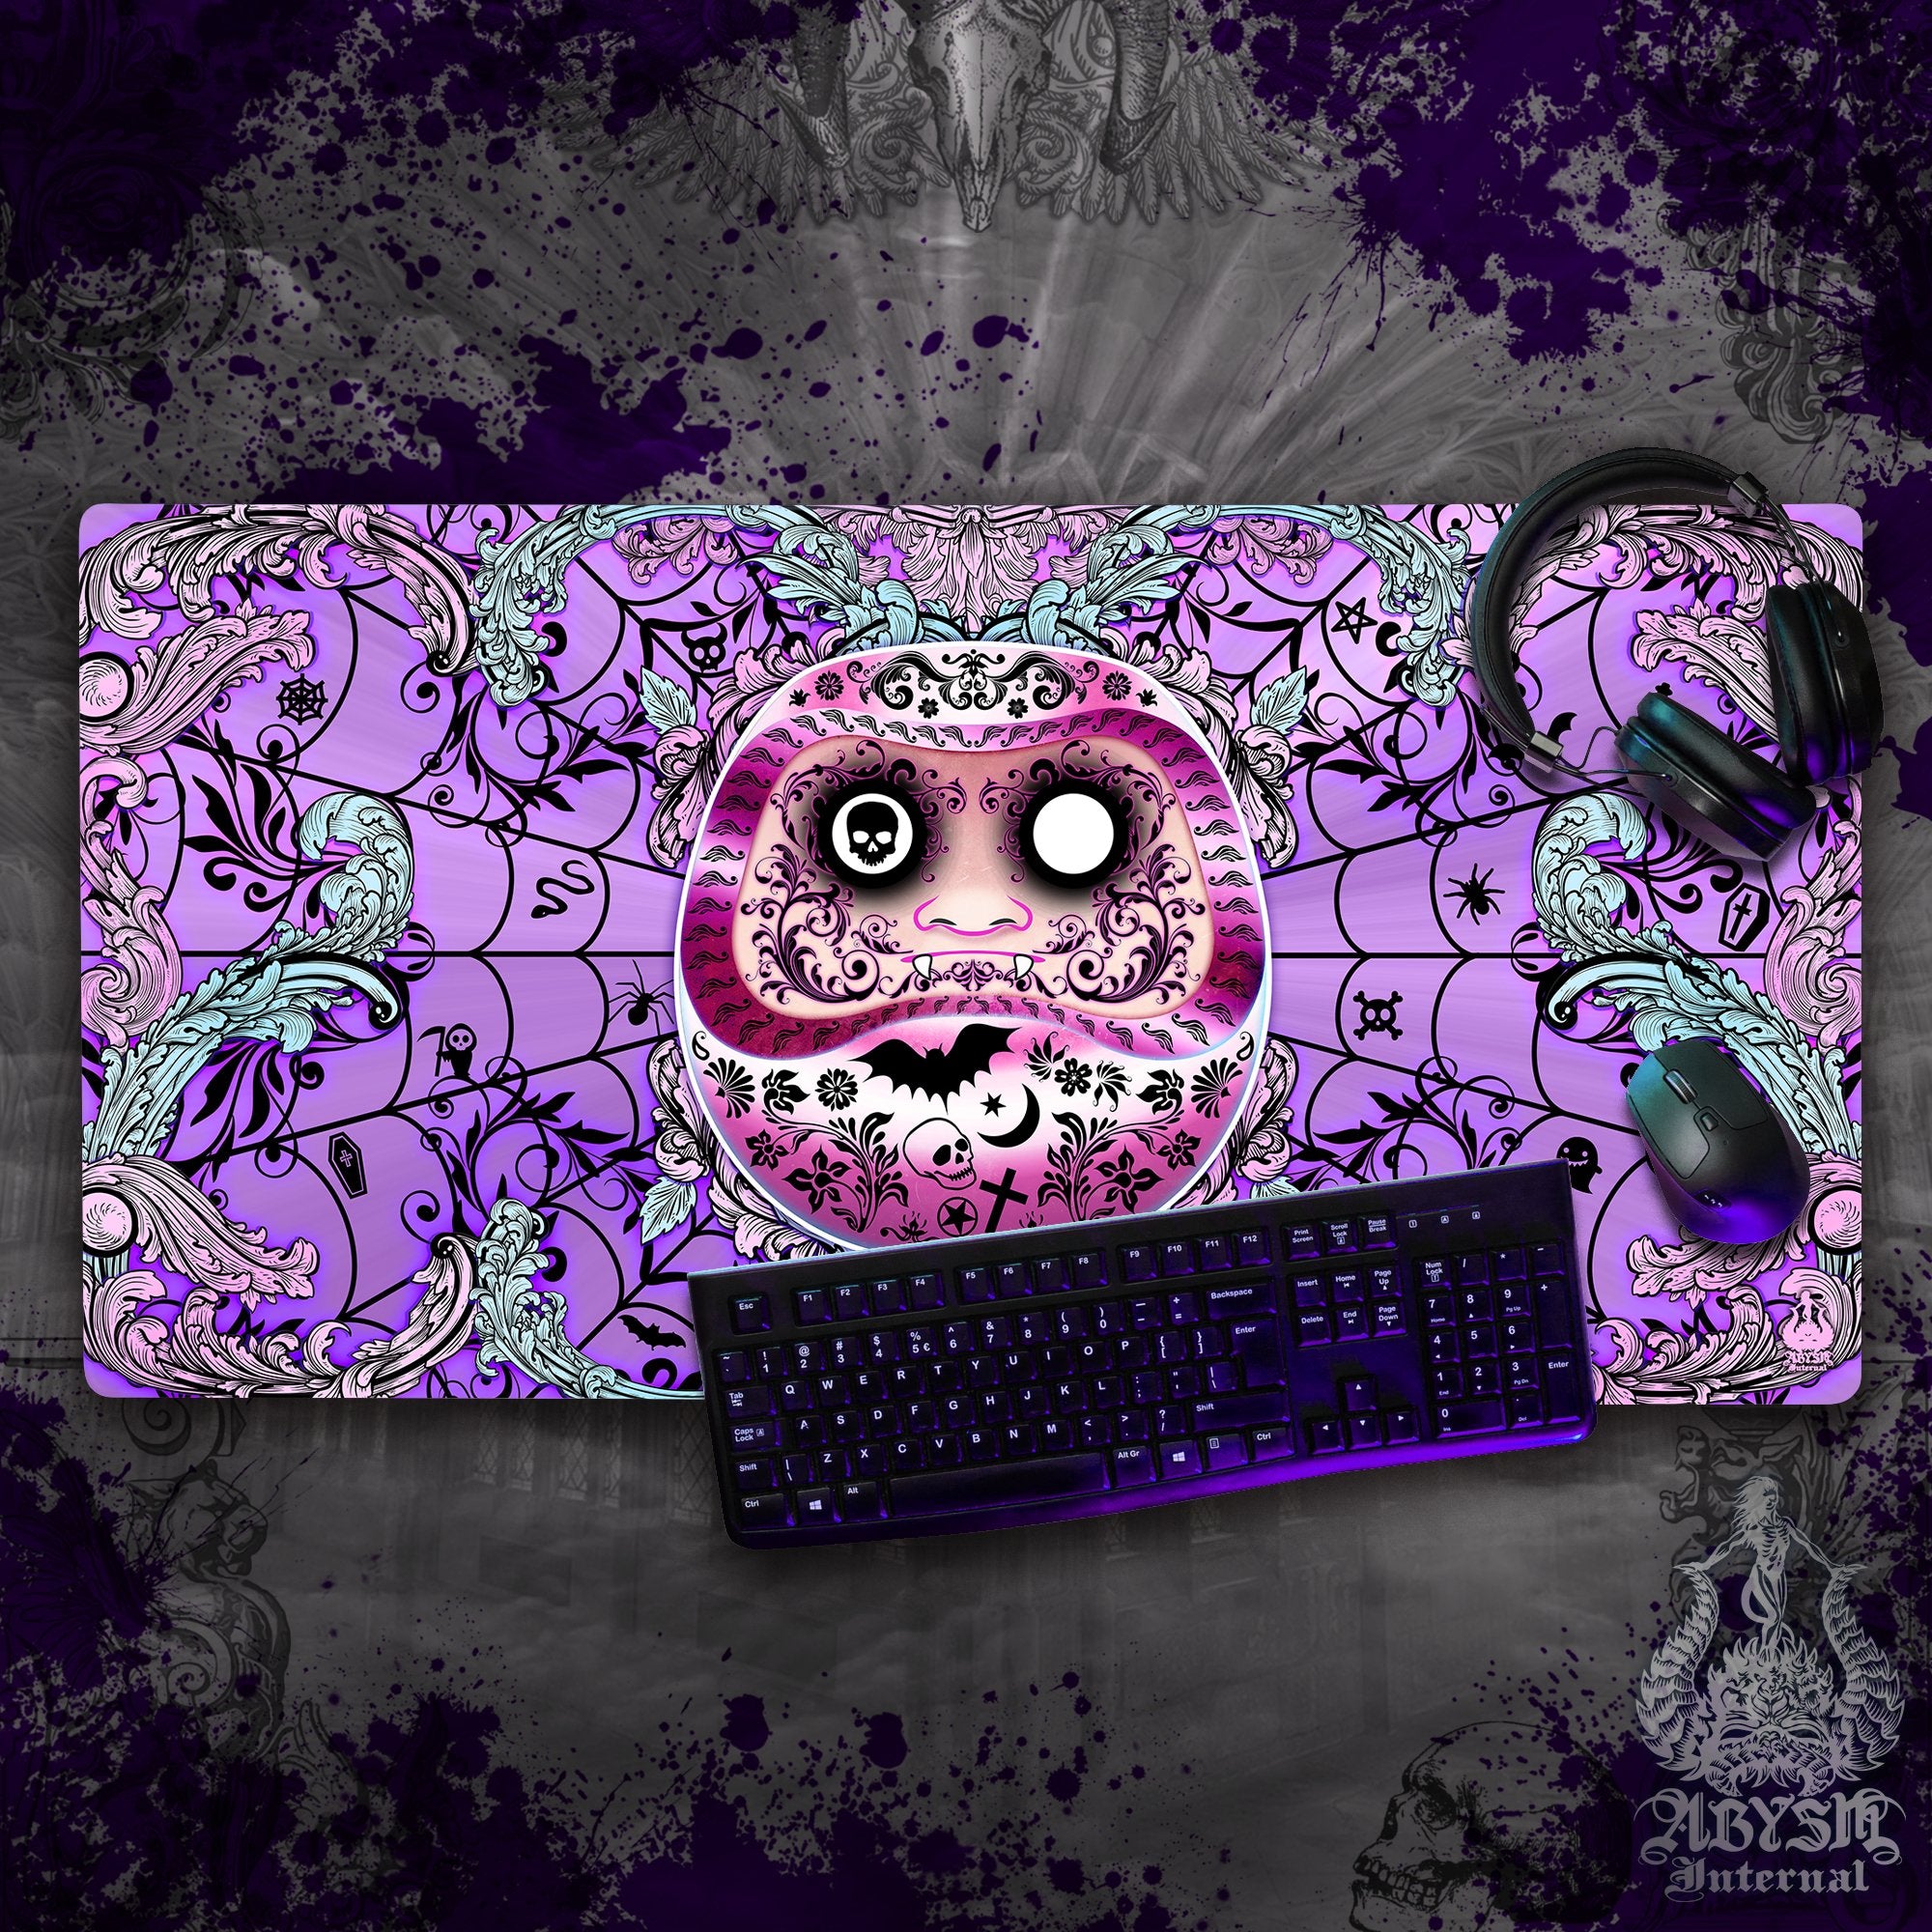 Gaming Mouse Pad, Funny Daruma Desk Mat, Pastel Goth Table Protector Cover, Purple and Black Workpad, Dark Japanese Art Print - 2 Colors - Abysm Internal